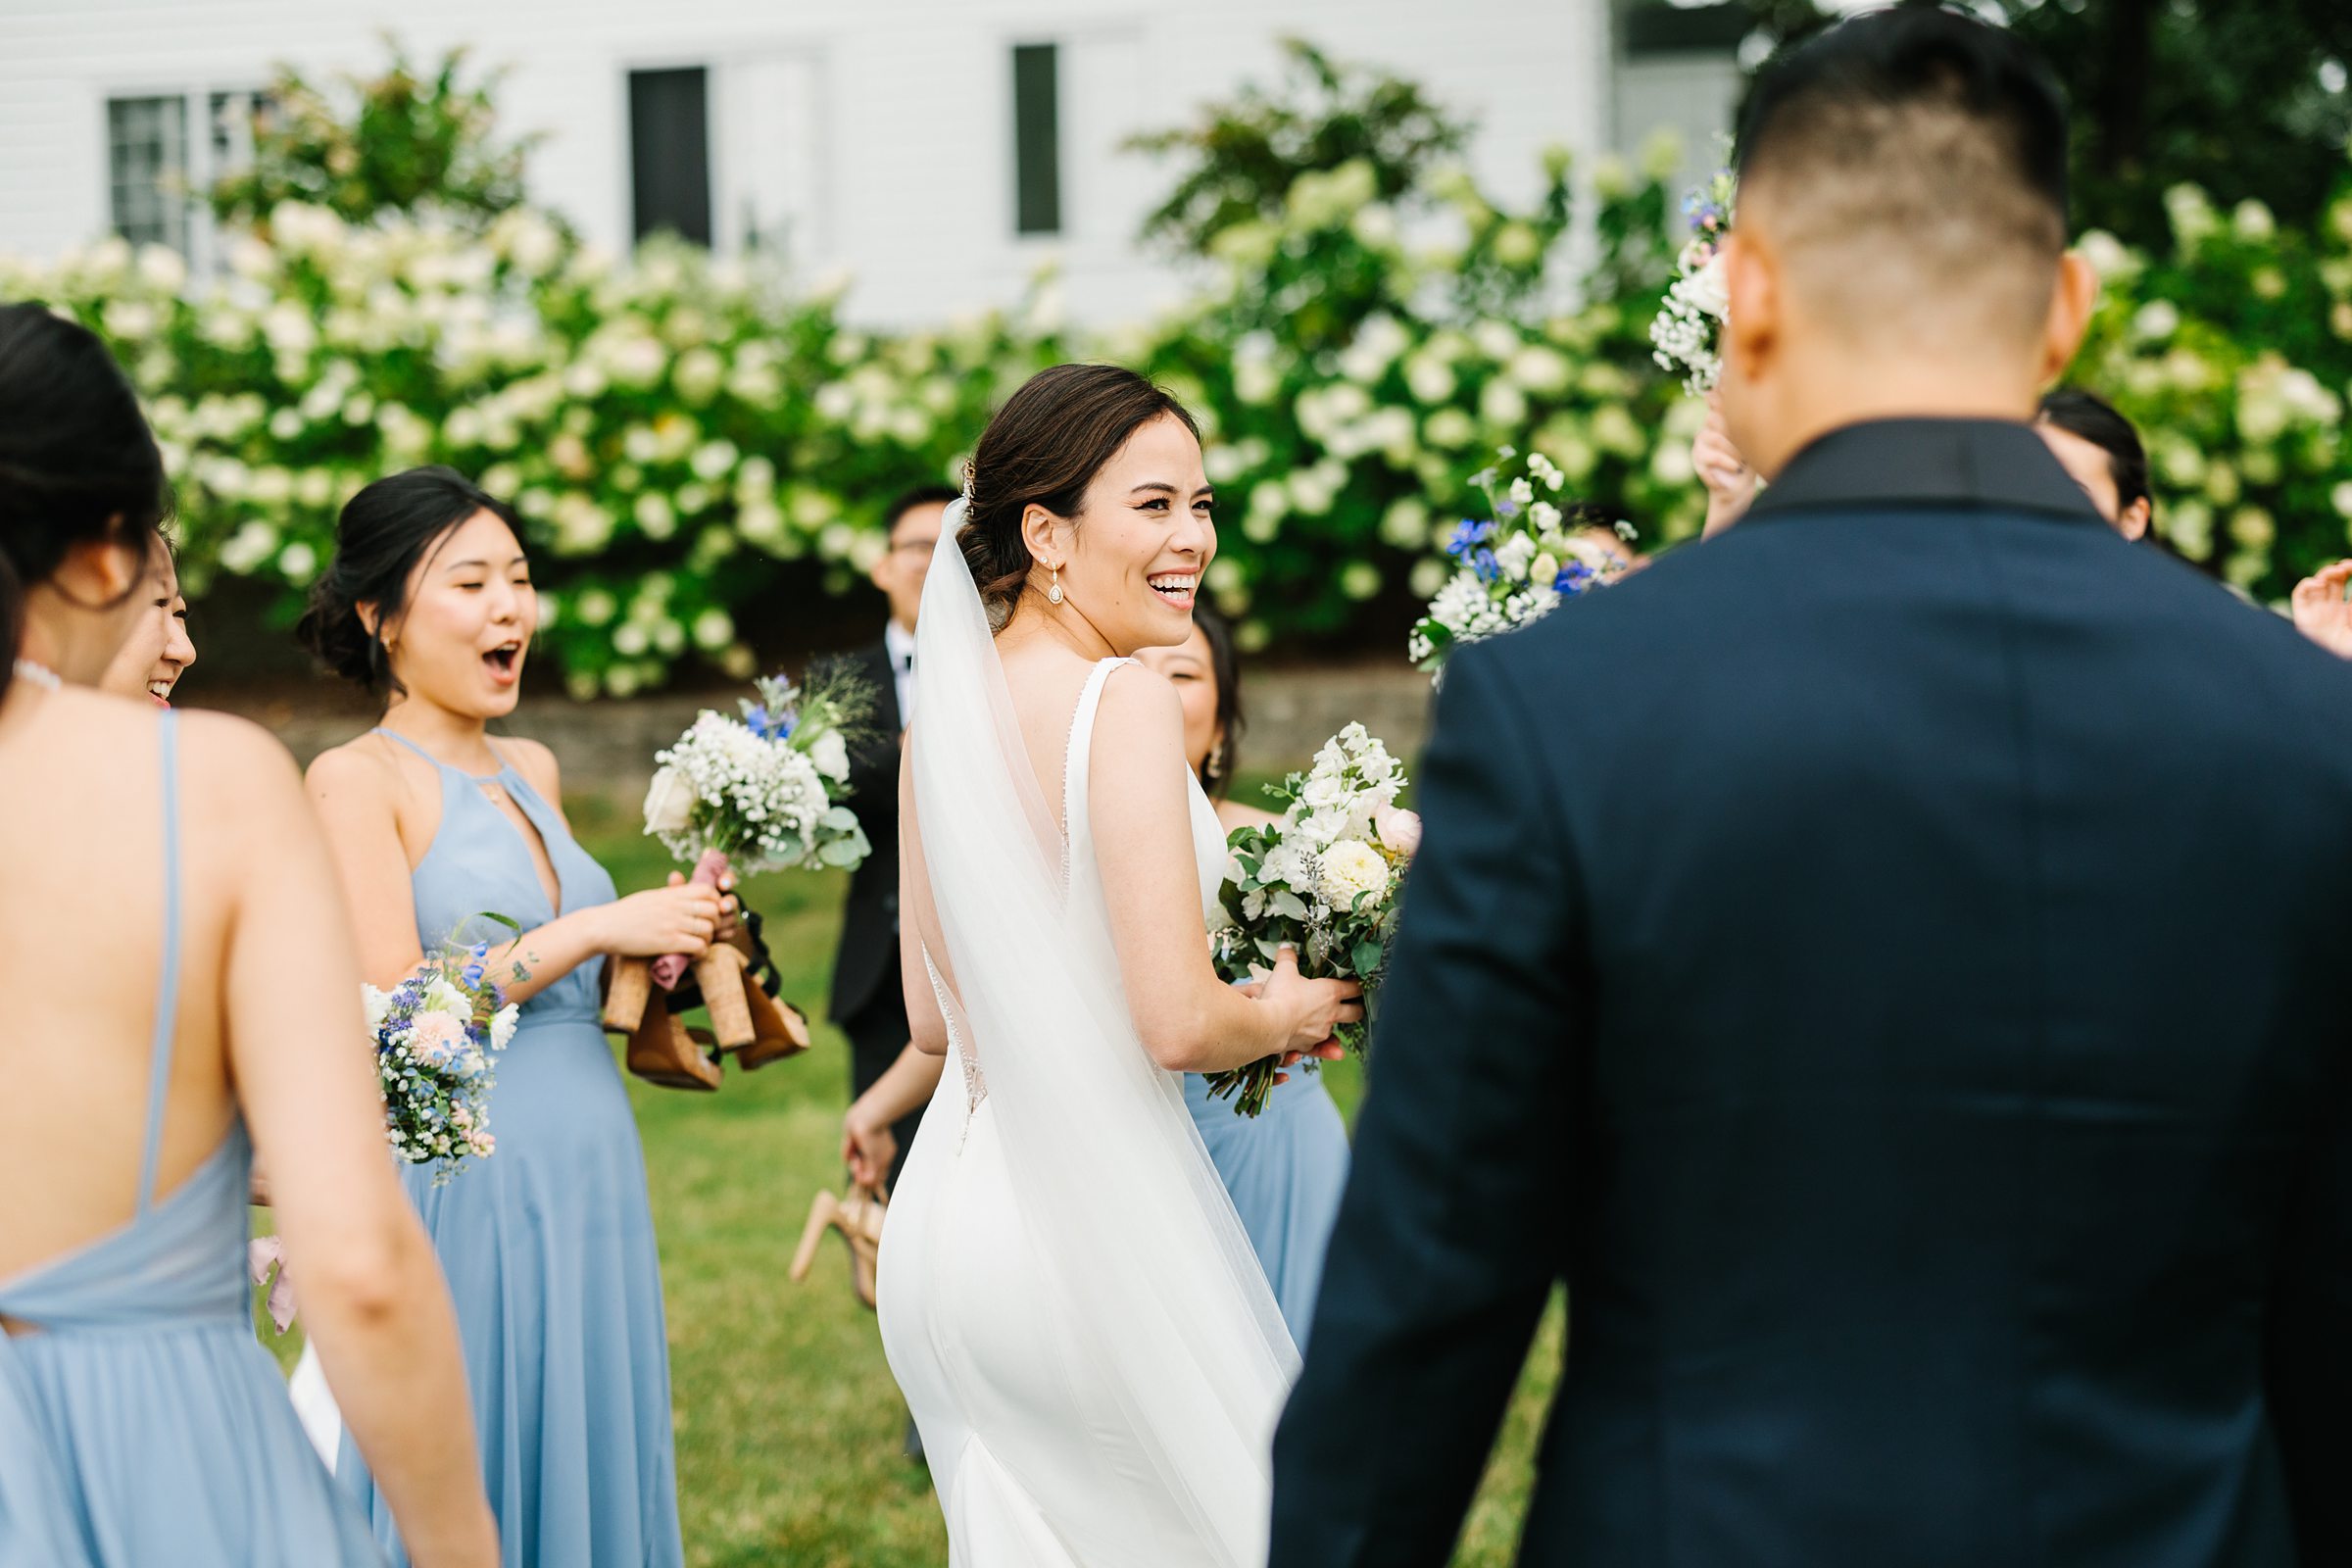 Bride looks over and smiles, surrounded by loved ones at her Walenwoods summer wedding by Detroit Wedding Photographer Michele Maloney